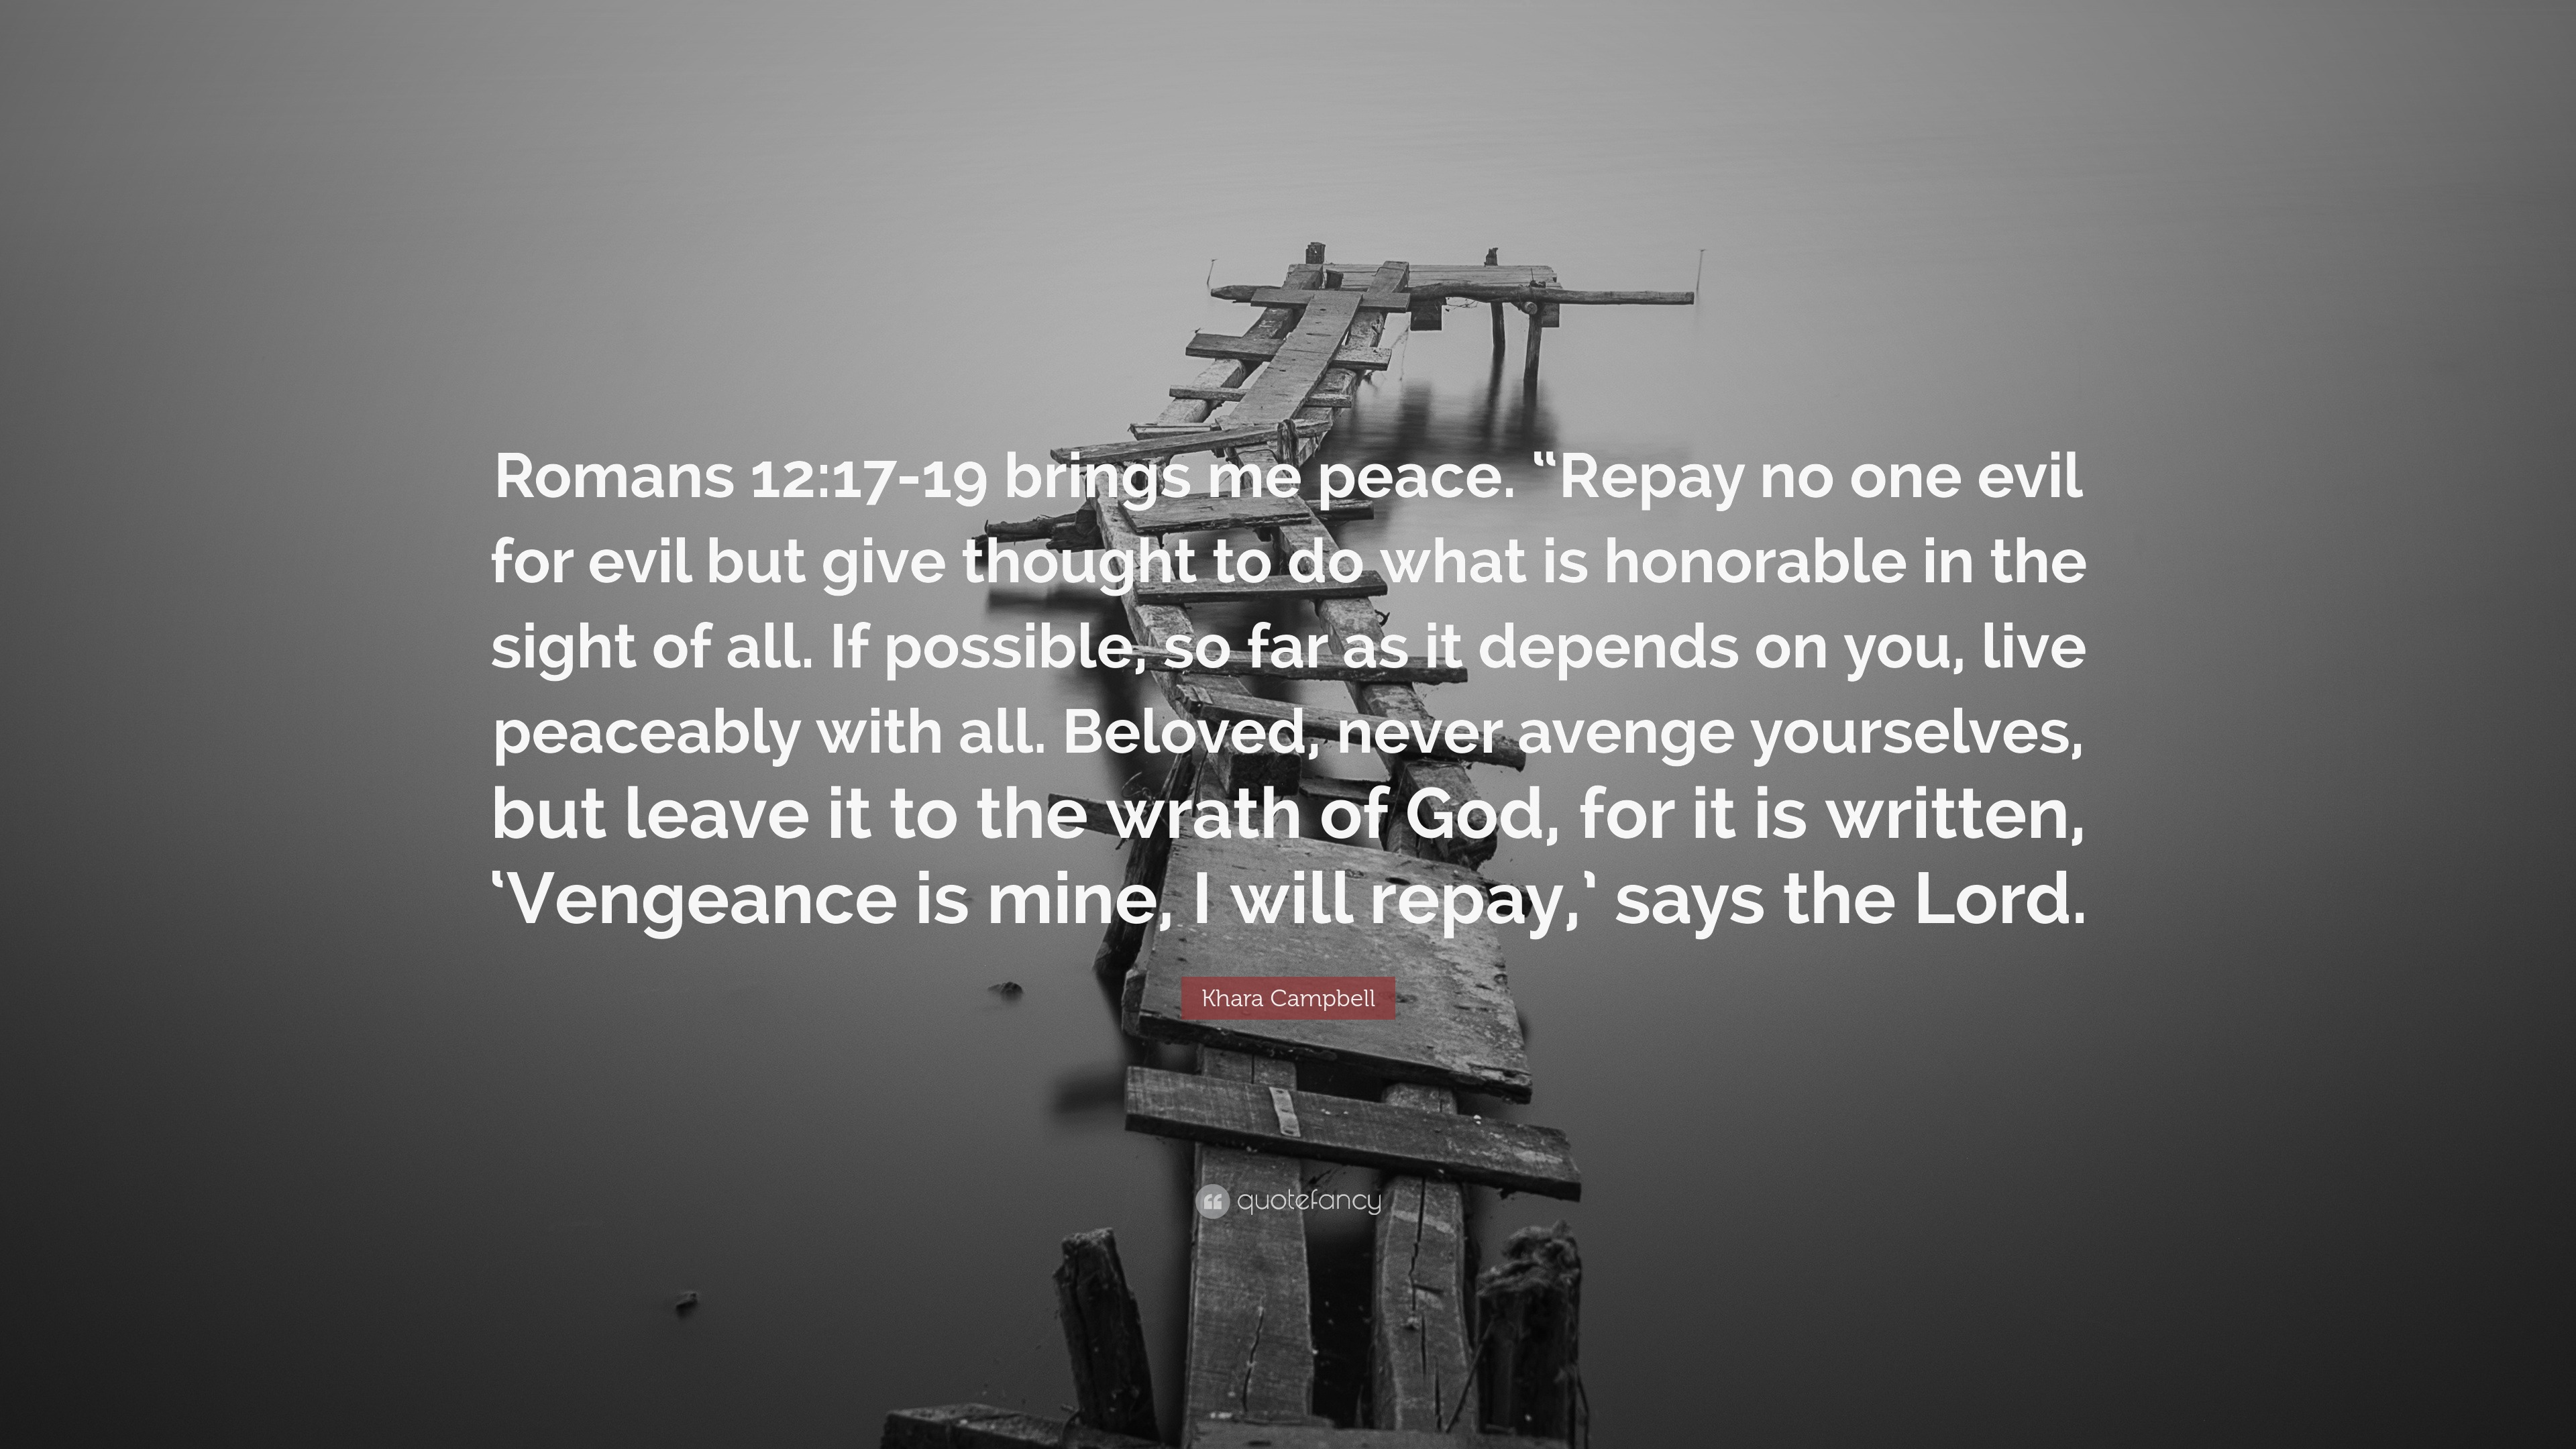 What does it mean when God says, “Vengeance is mine” (Romans 12:19